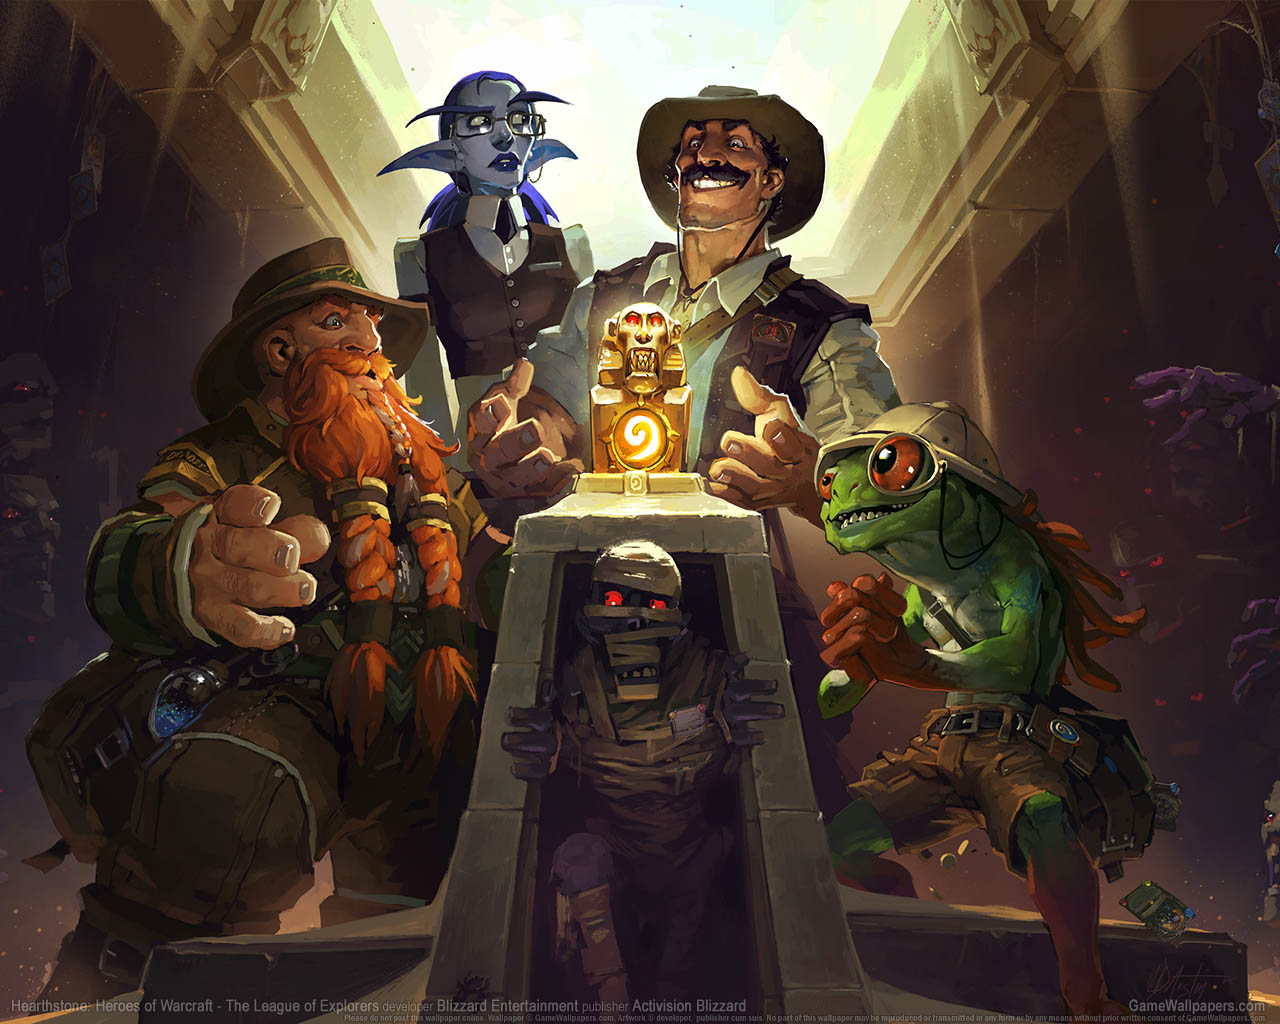 Hearthstone%2525253A Heroes of Warcraft - The League of Explorers wallpaper 01 1280x1024